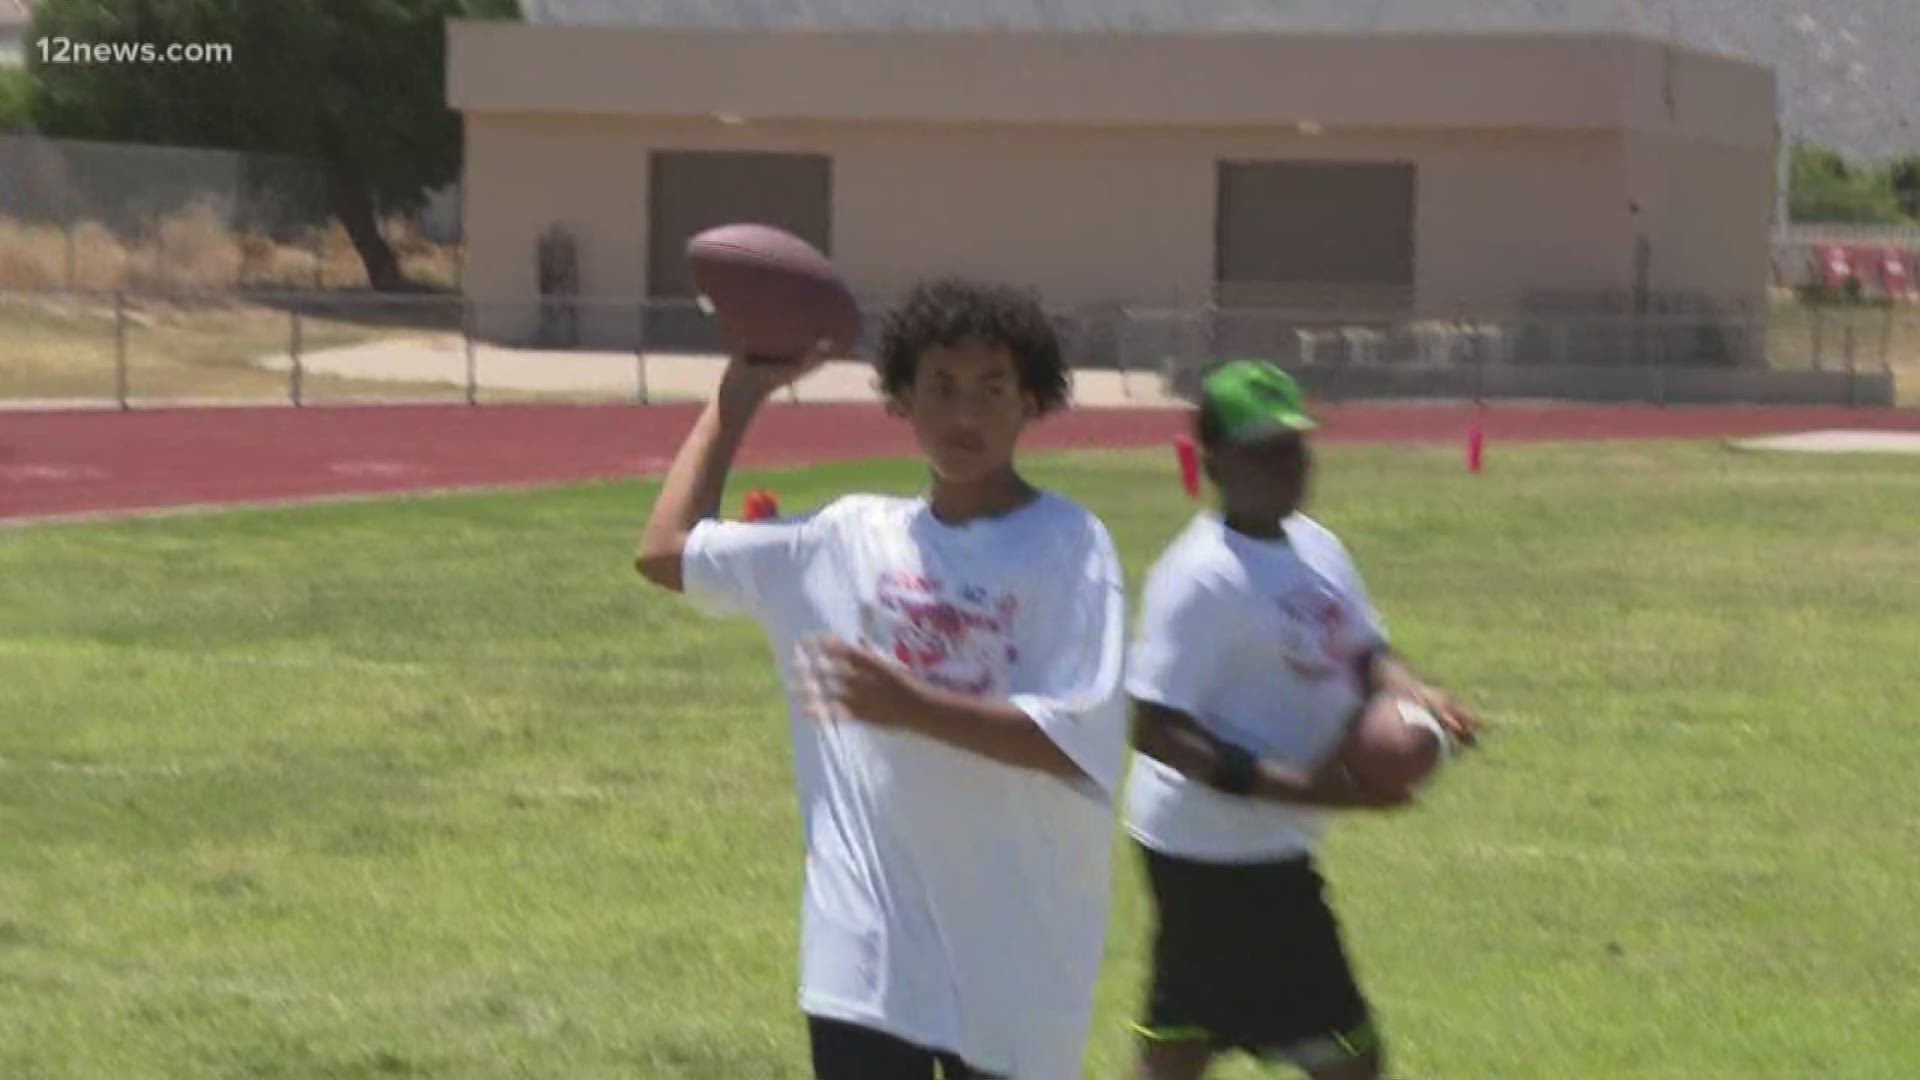 Local NFL legends like JD Hill are hosting a free football camp for kids out at South Mountain High School this weekend. Their goal is to get kids off the street and inspire them.